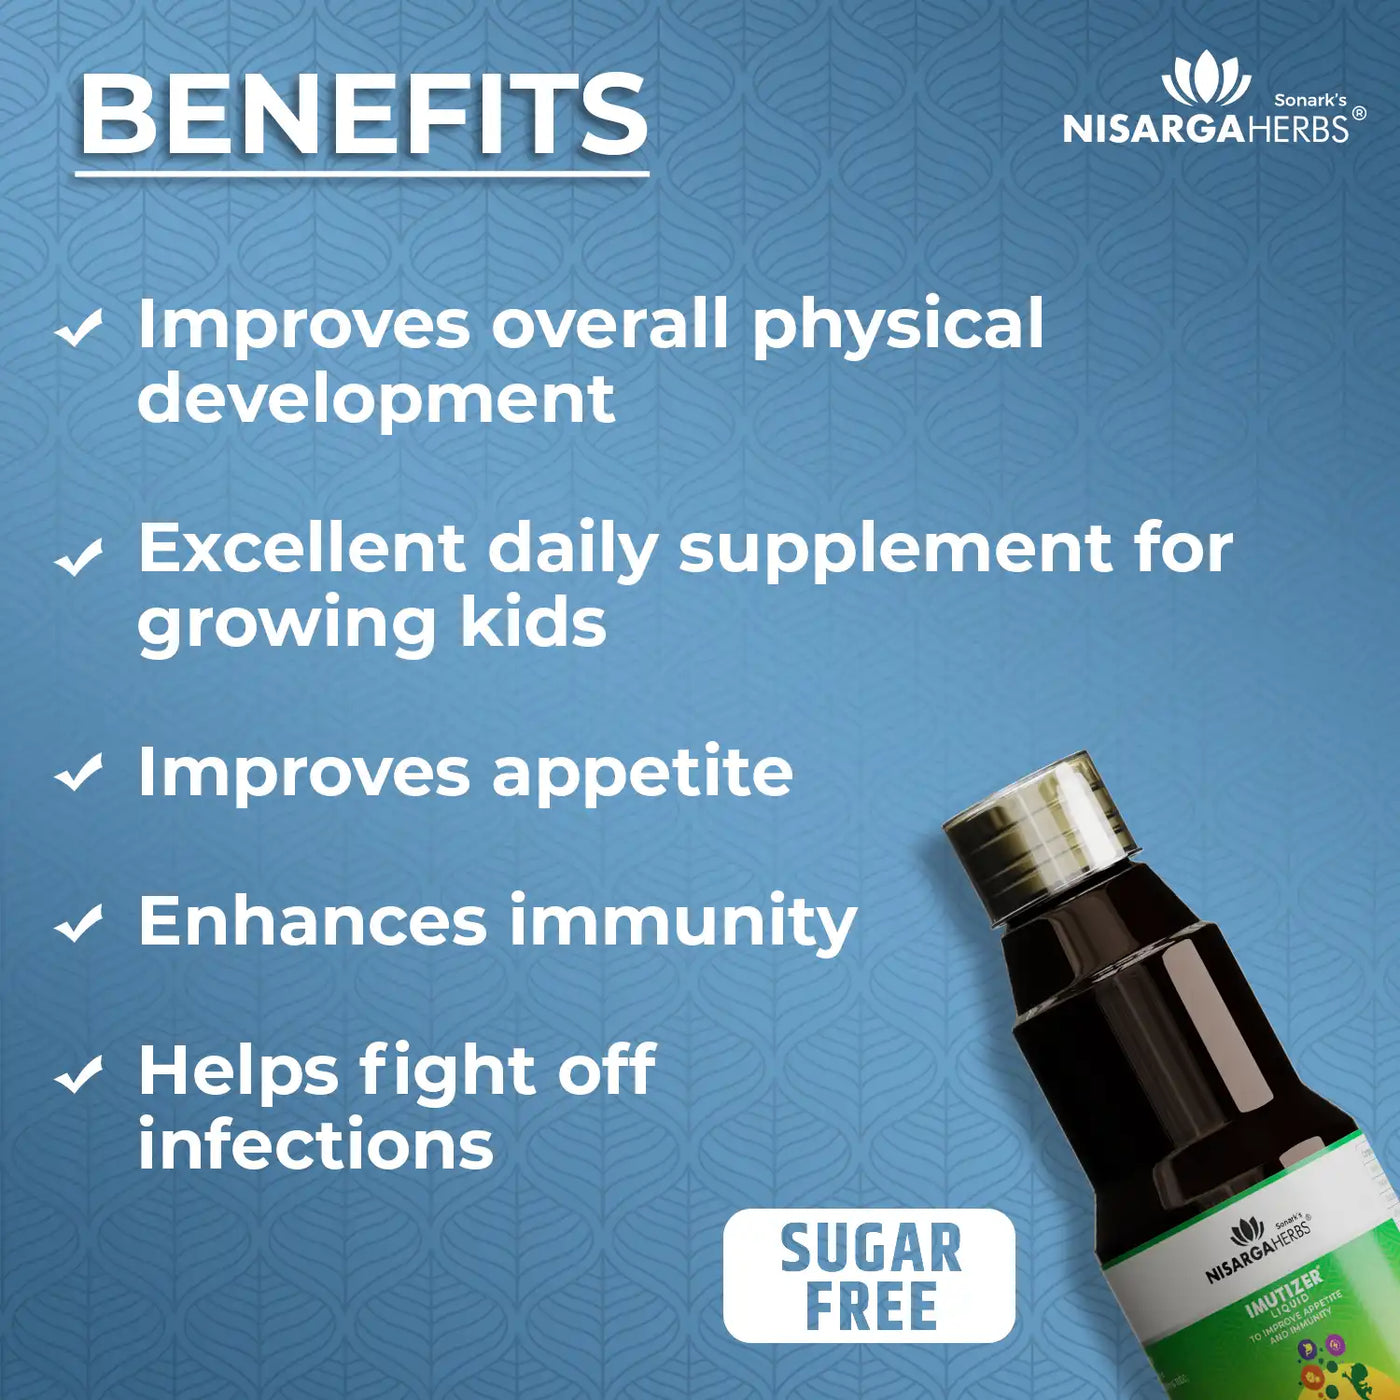 sugar free immunity boosting syrup for kids below 12 years of age. improves appetite and acts as a natural deworming supplement. excellent daily tonic to keep kids healthy